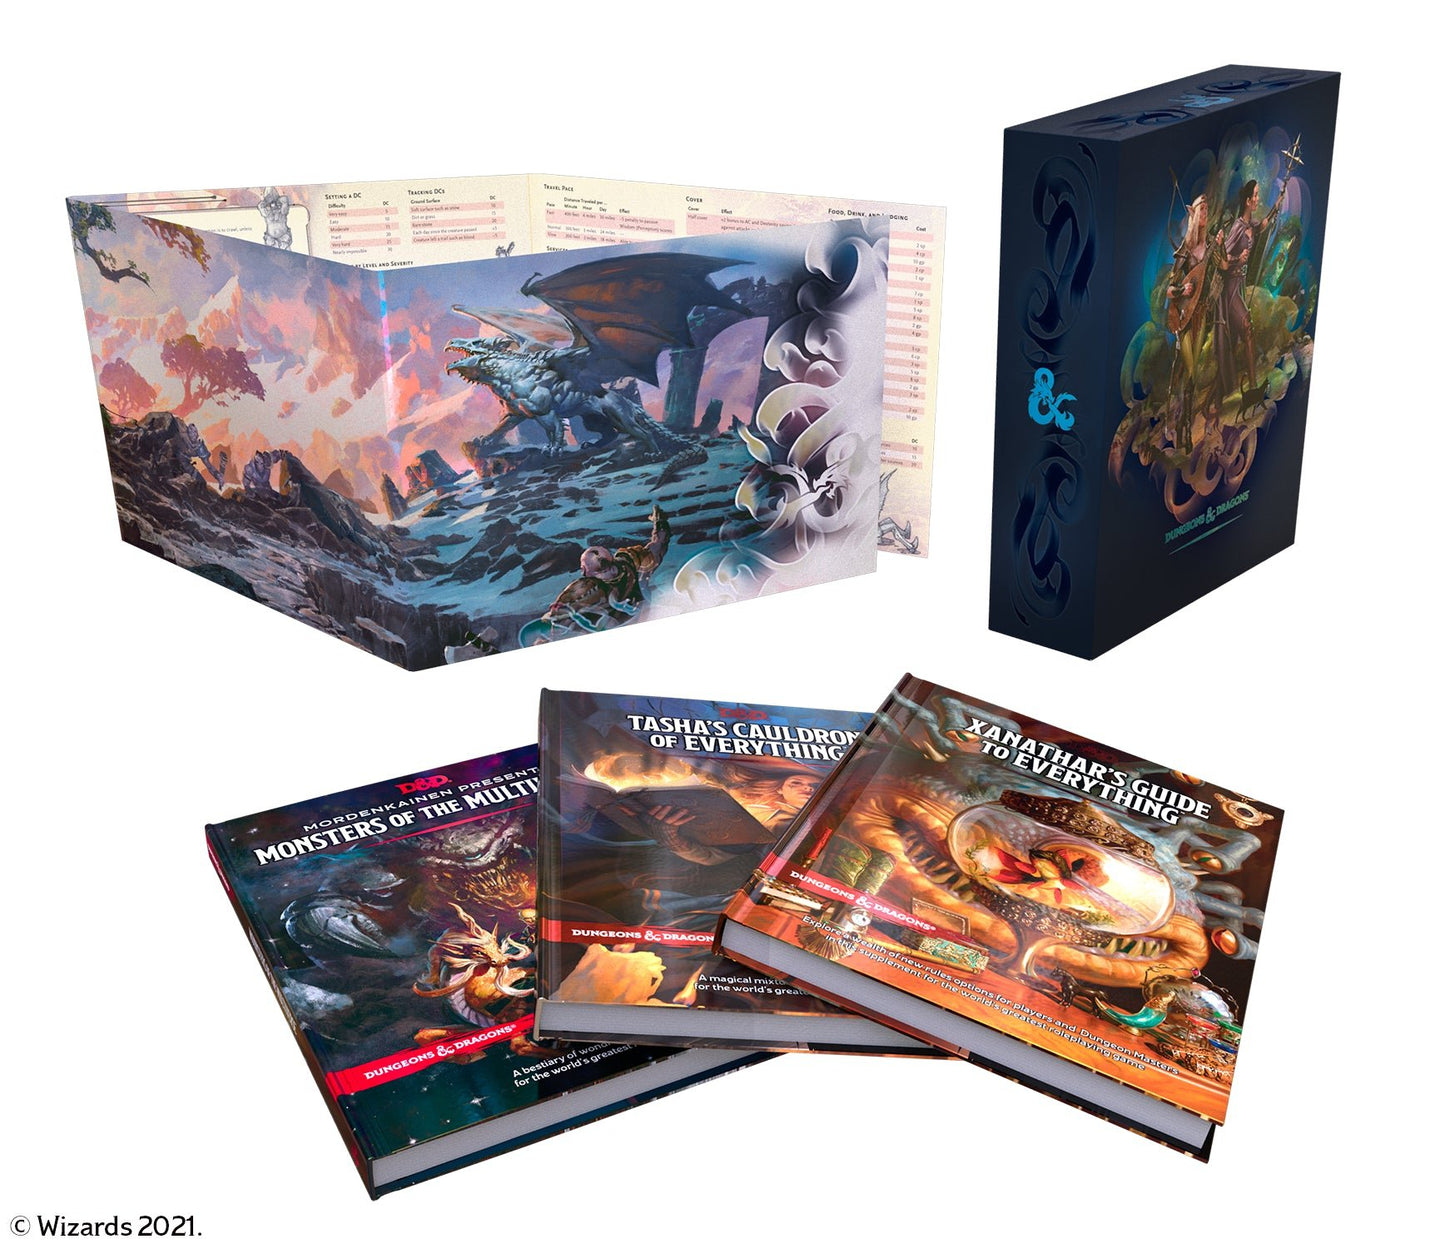 Dungeons & Dragons RPG: Rules Expansion Gift Set from WIZARDS OF THE COAST, INC at The Compleat Strategist